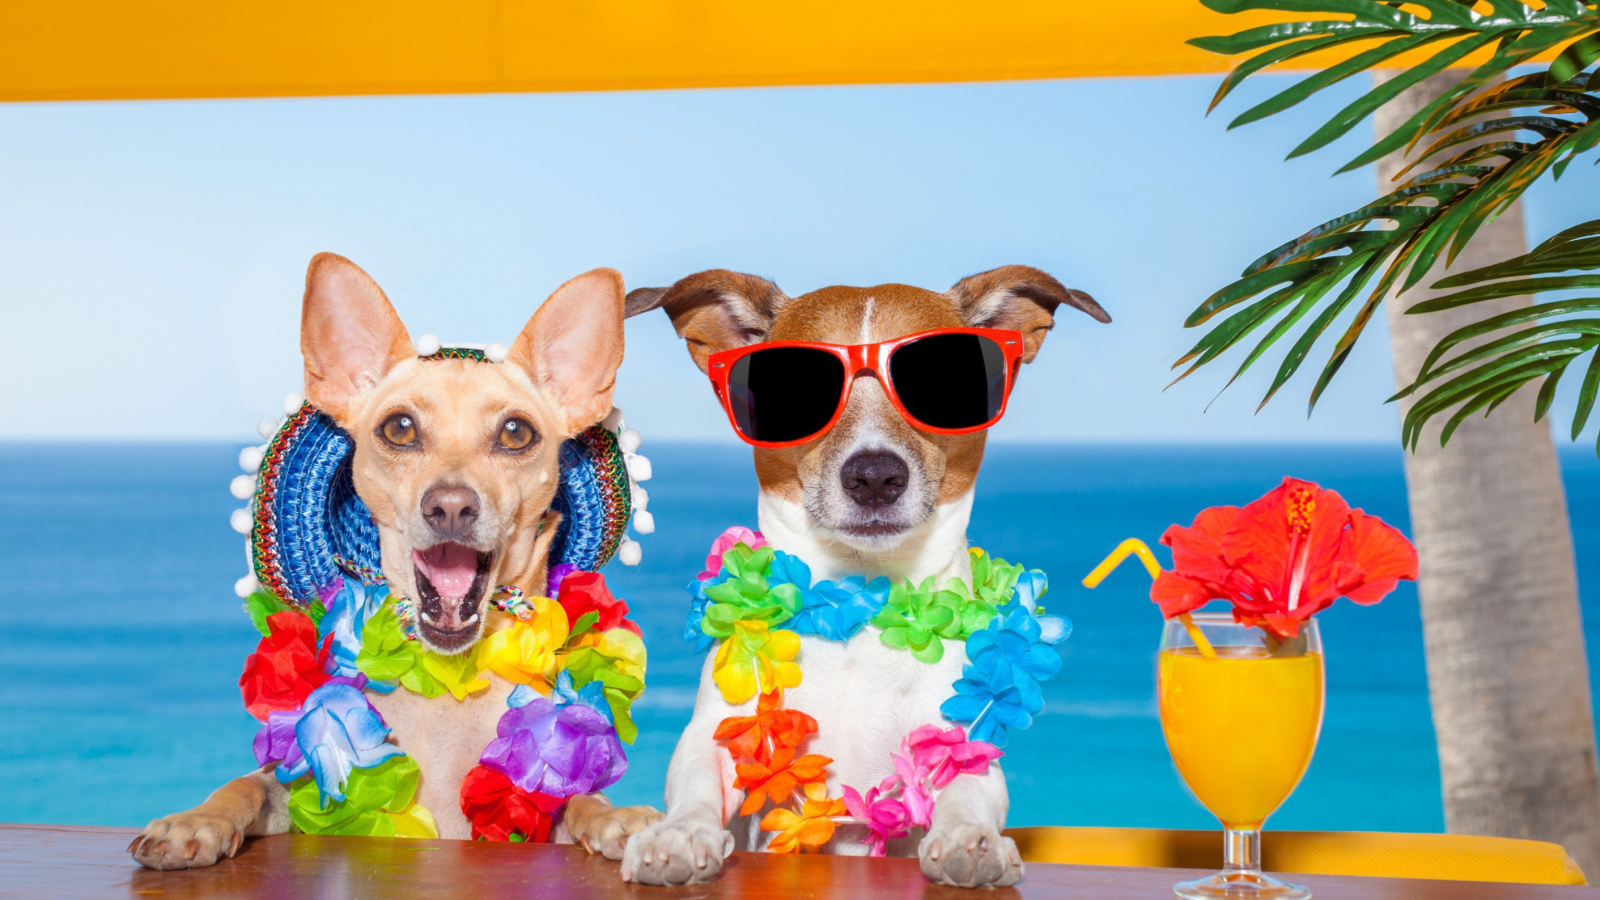 Dogs in tropical Apparel wallpaper 1600x900